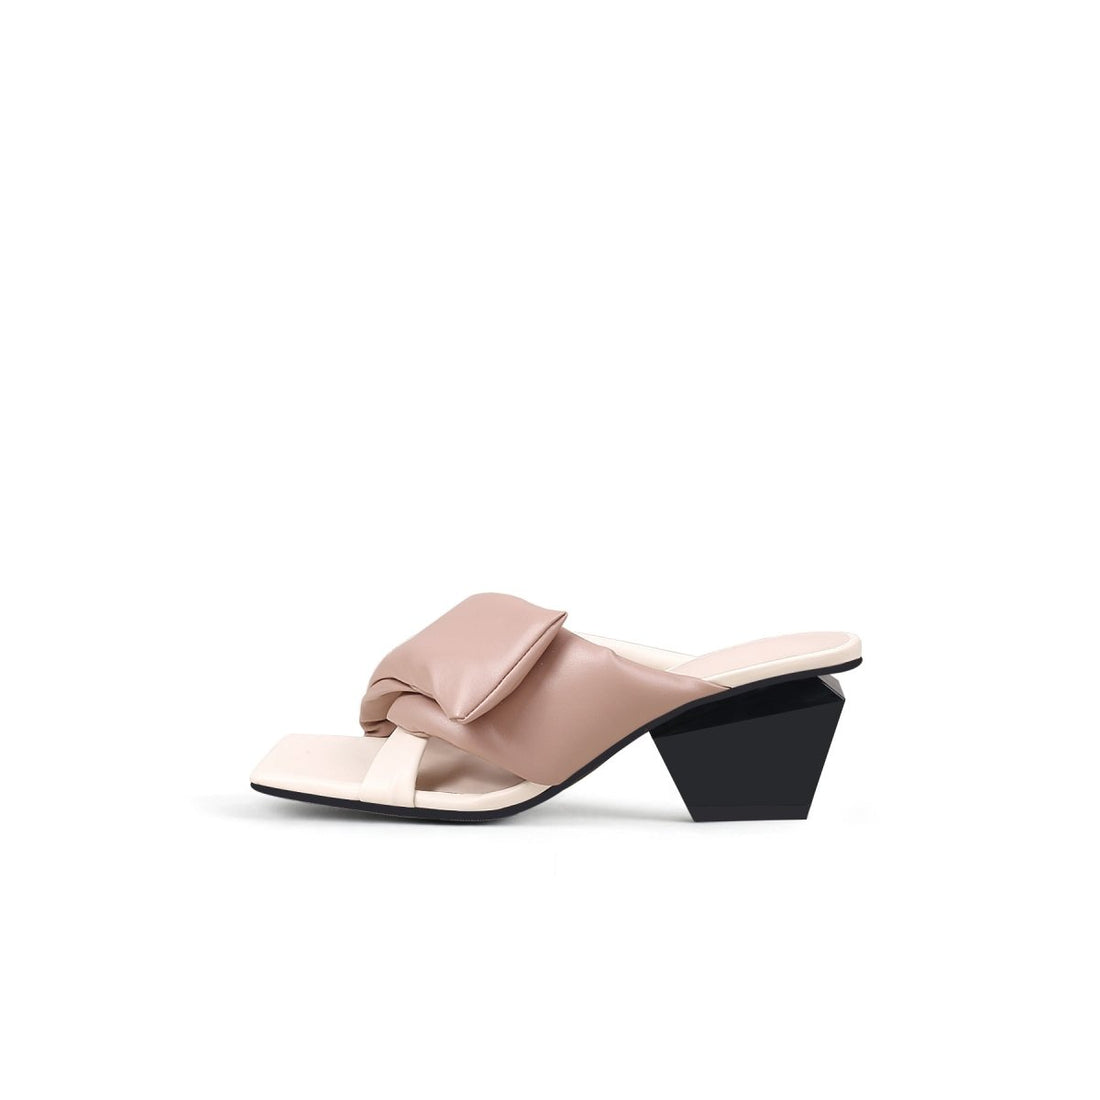 WRAP Padded Apricot Mules - 0cm